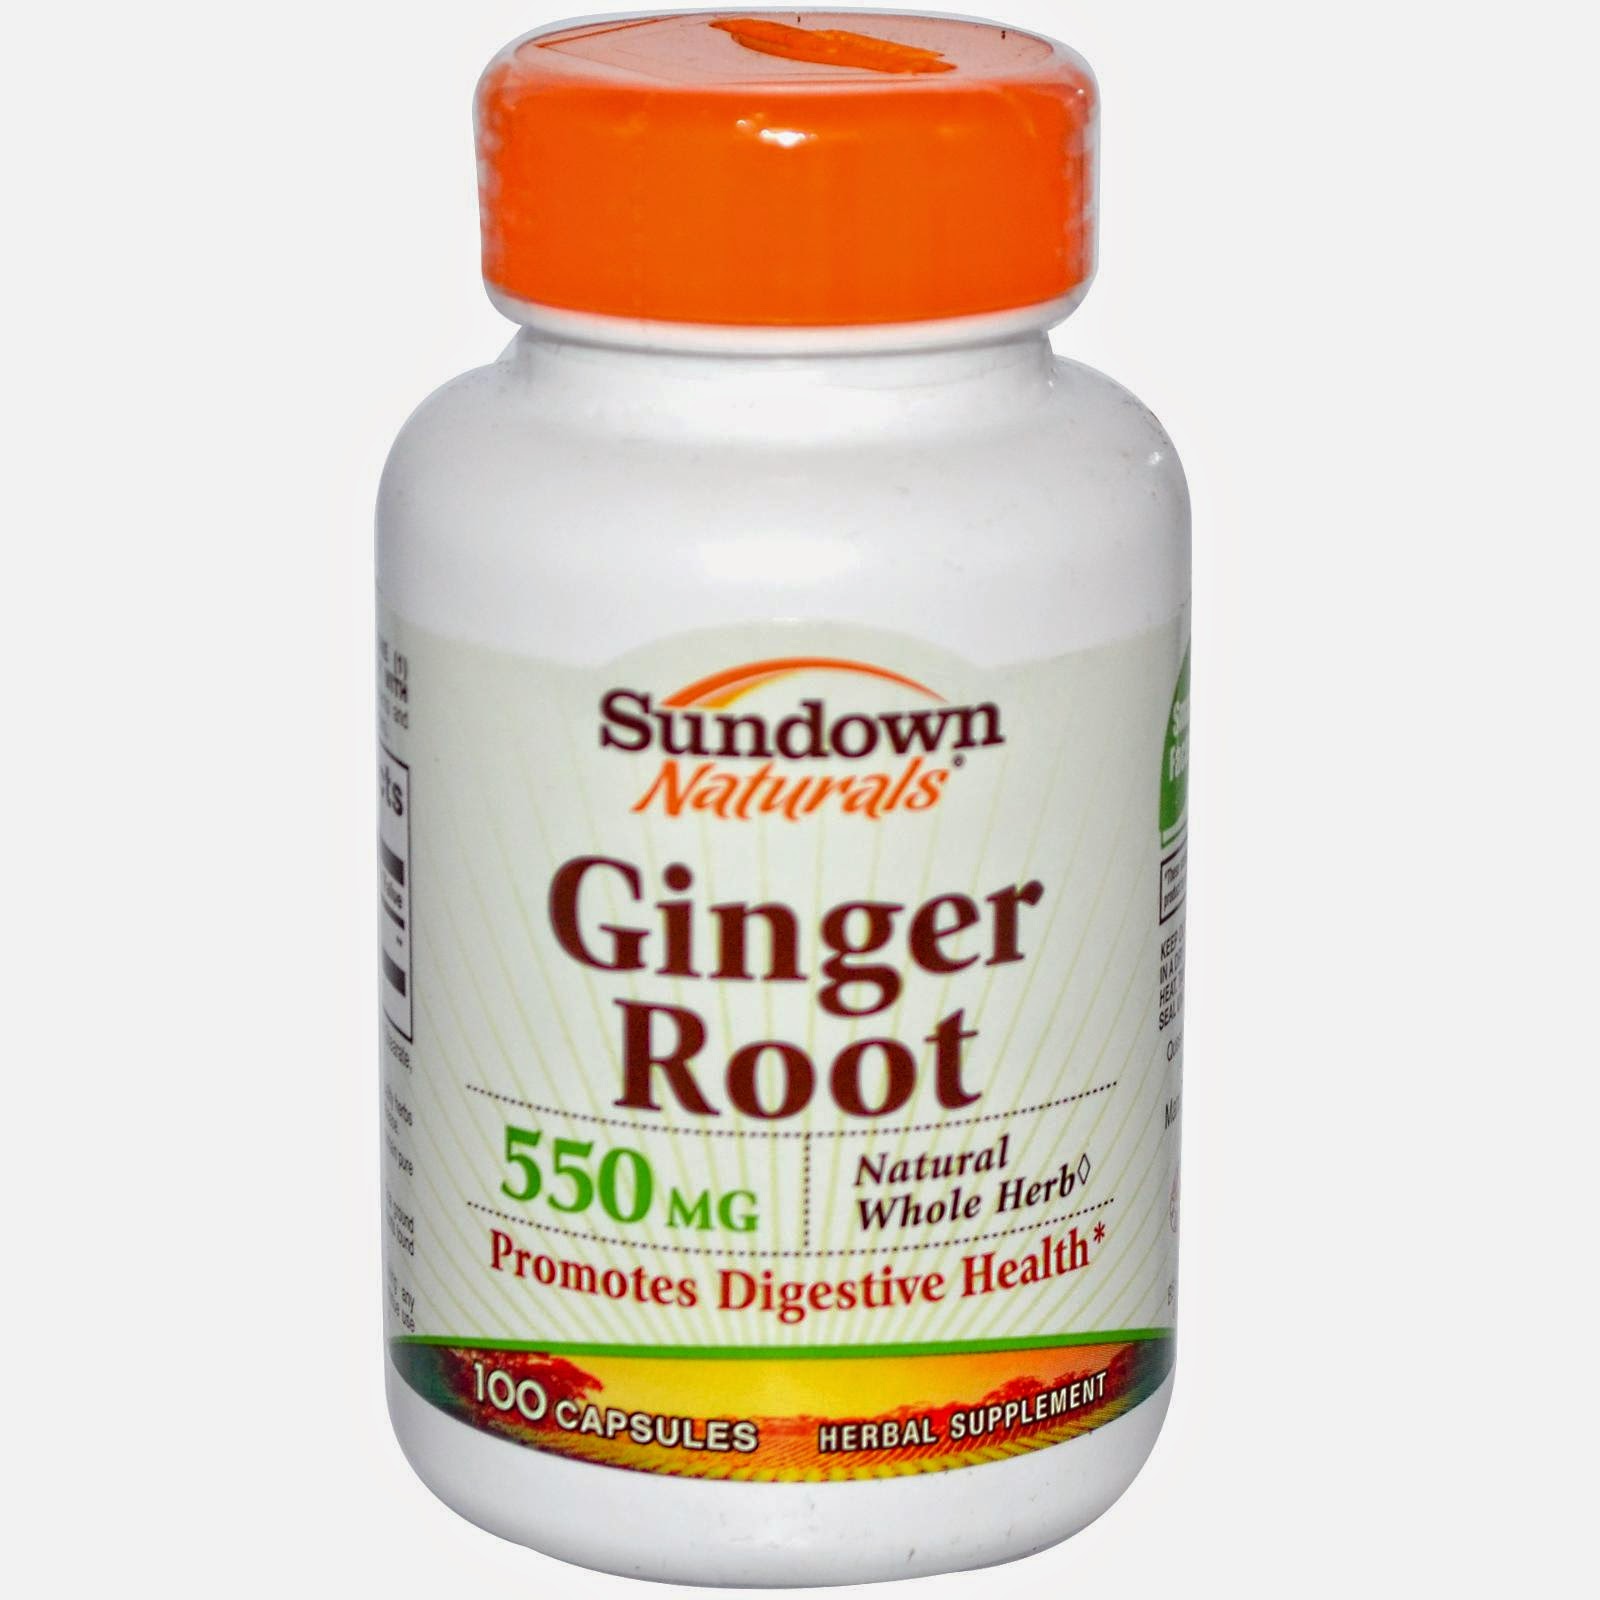 Benefits of Ginger Root Supplements